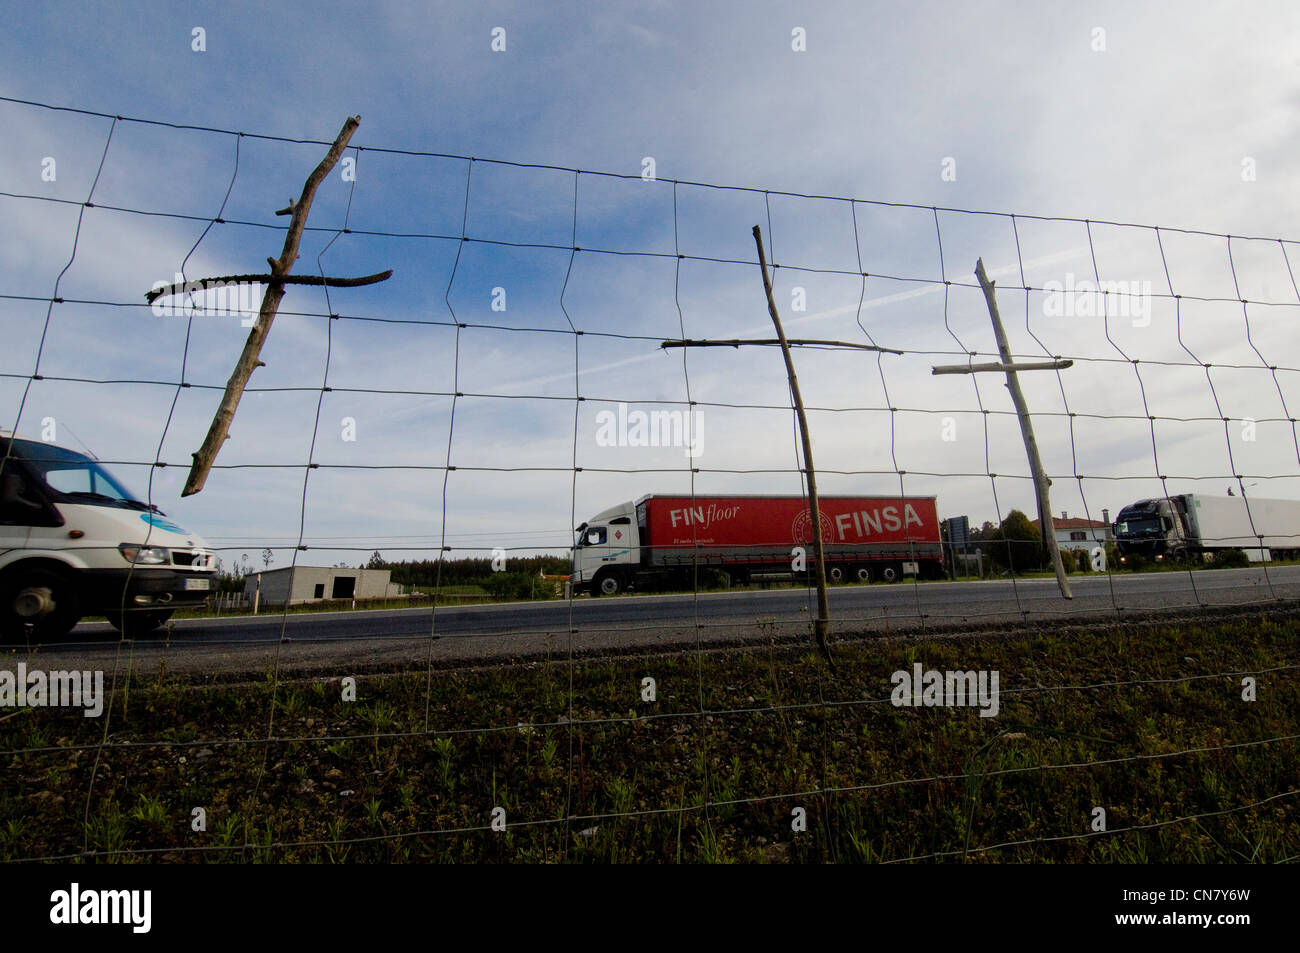 Spain, Galicia, Lavacolla, wooden crosses hanged on the fence of the expressway Stock Photo